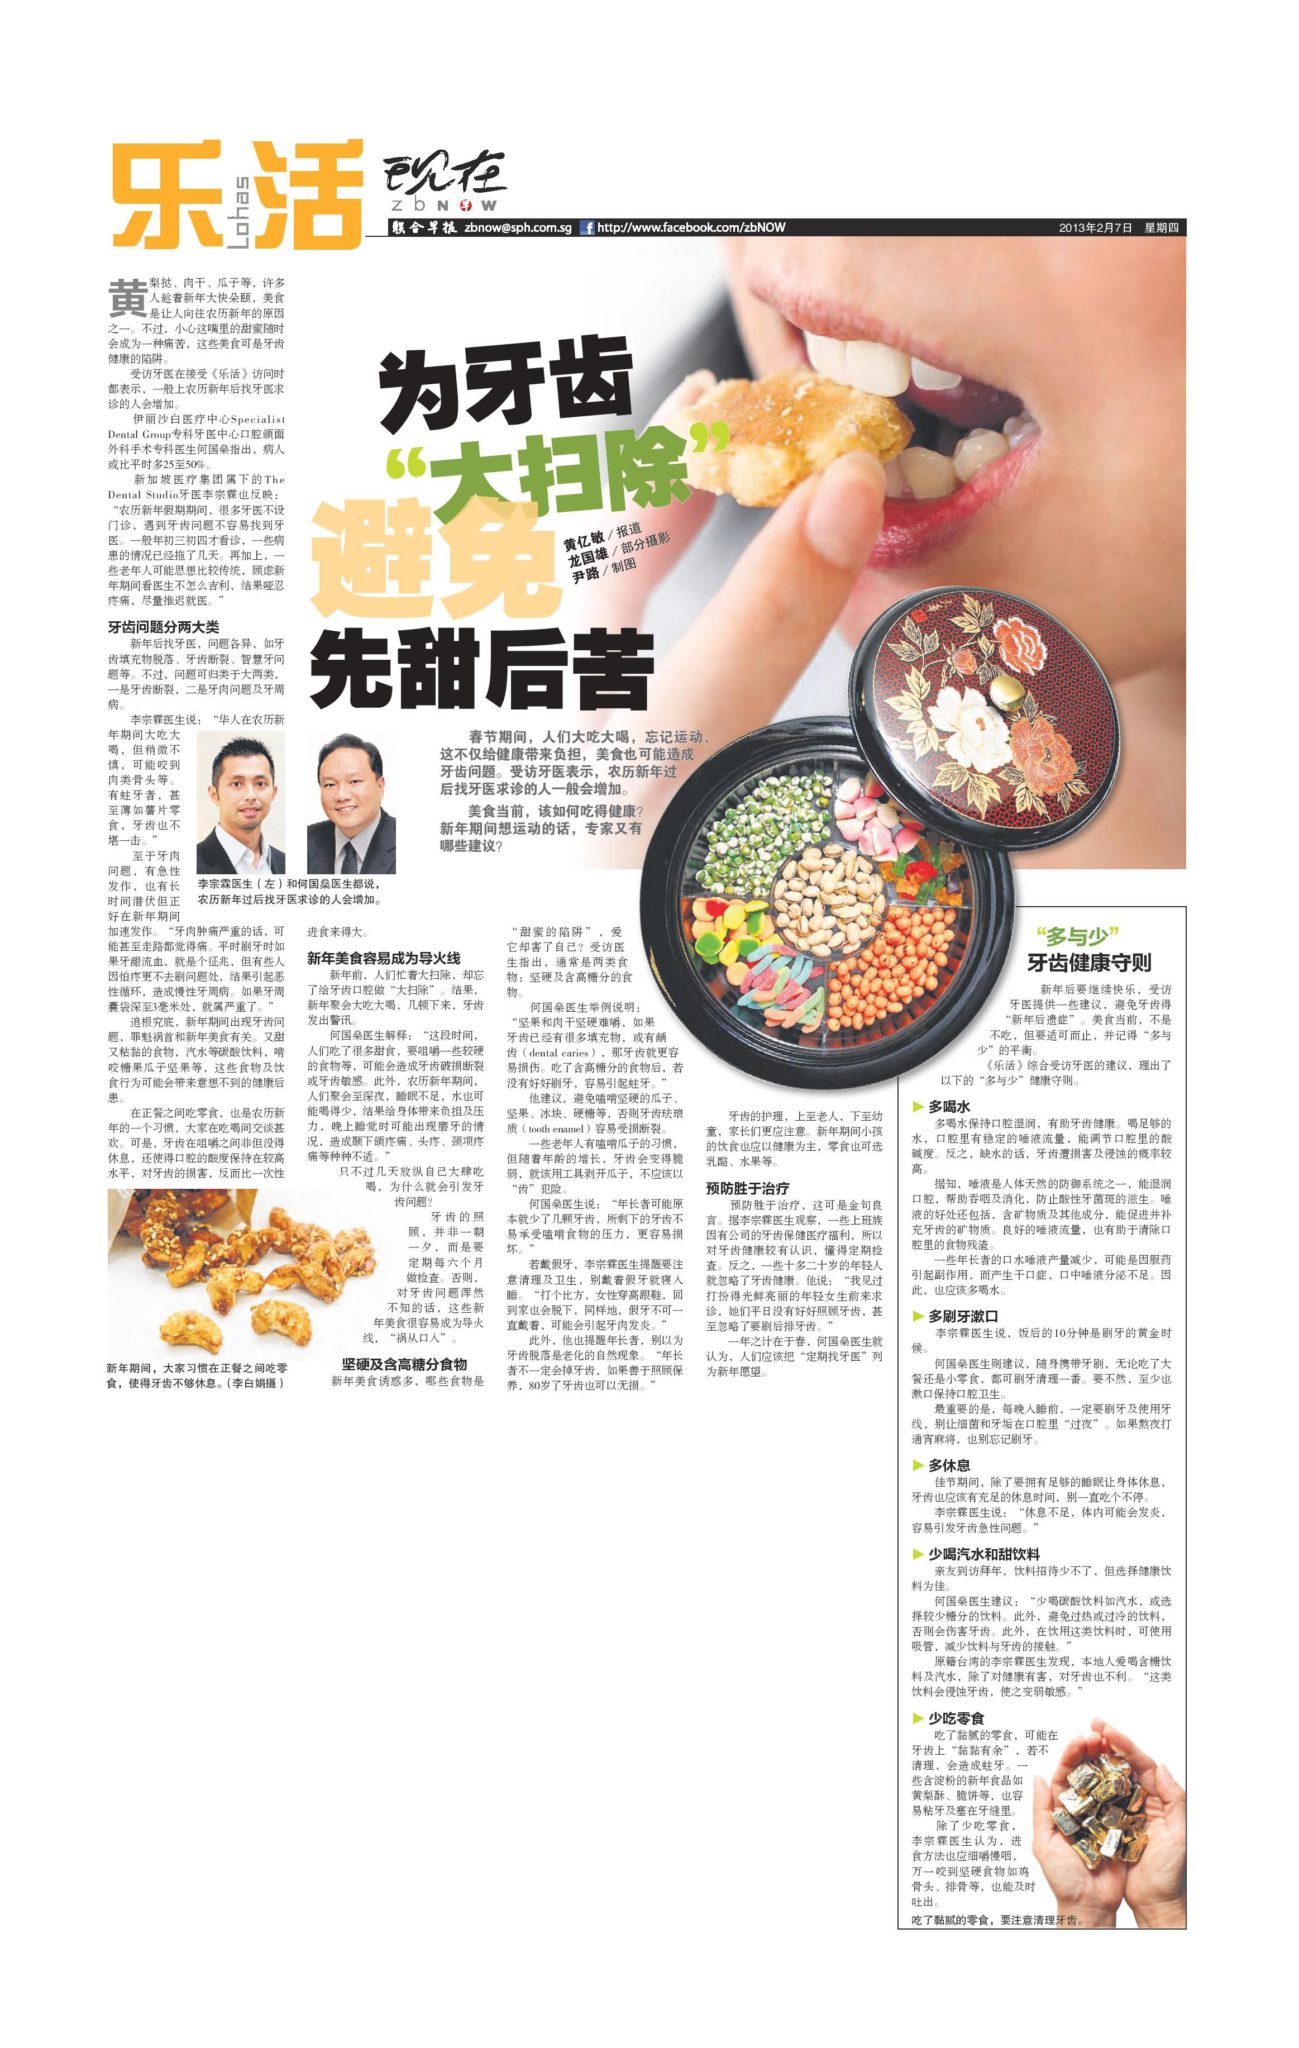 Lianhe Zaobao, February 7, 2013: “Spring Clean” Your Mouth This Chinese New Year